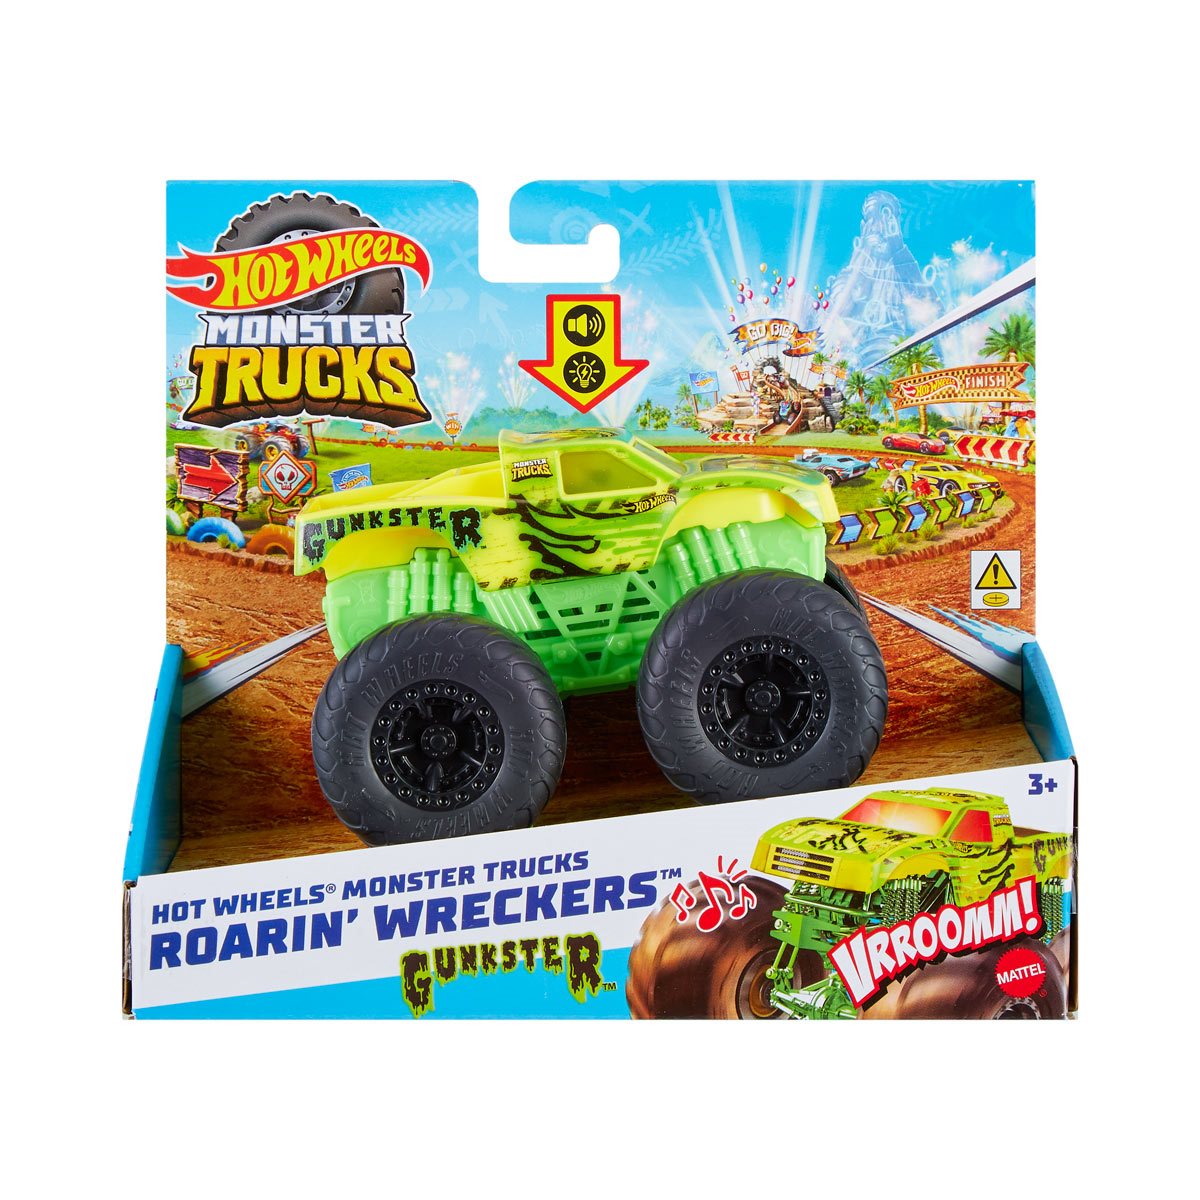 Hot Wheels Monster Trucks Roarin’ Wreckers, 1 1:43 Scale Truck with Lights  & Sounds